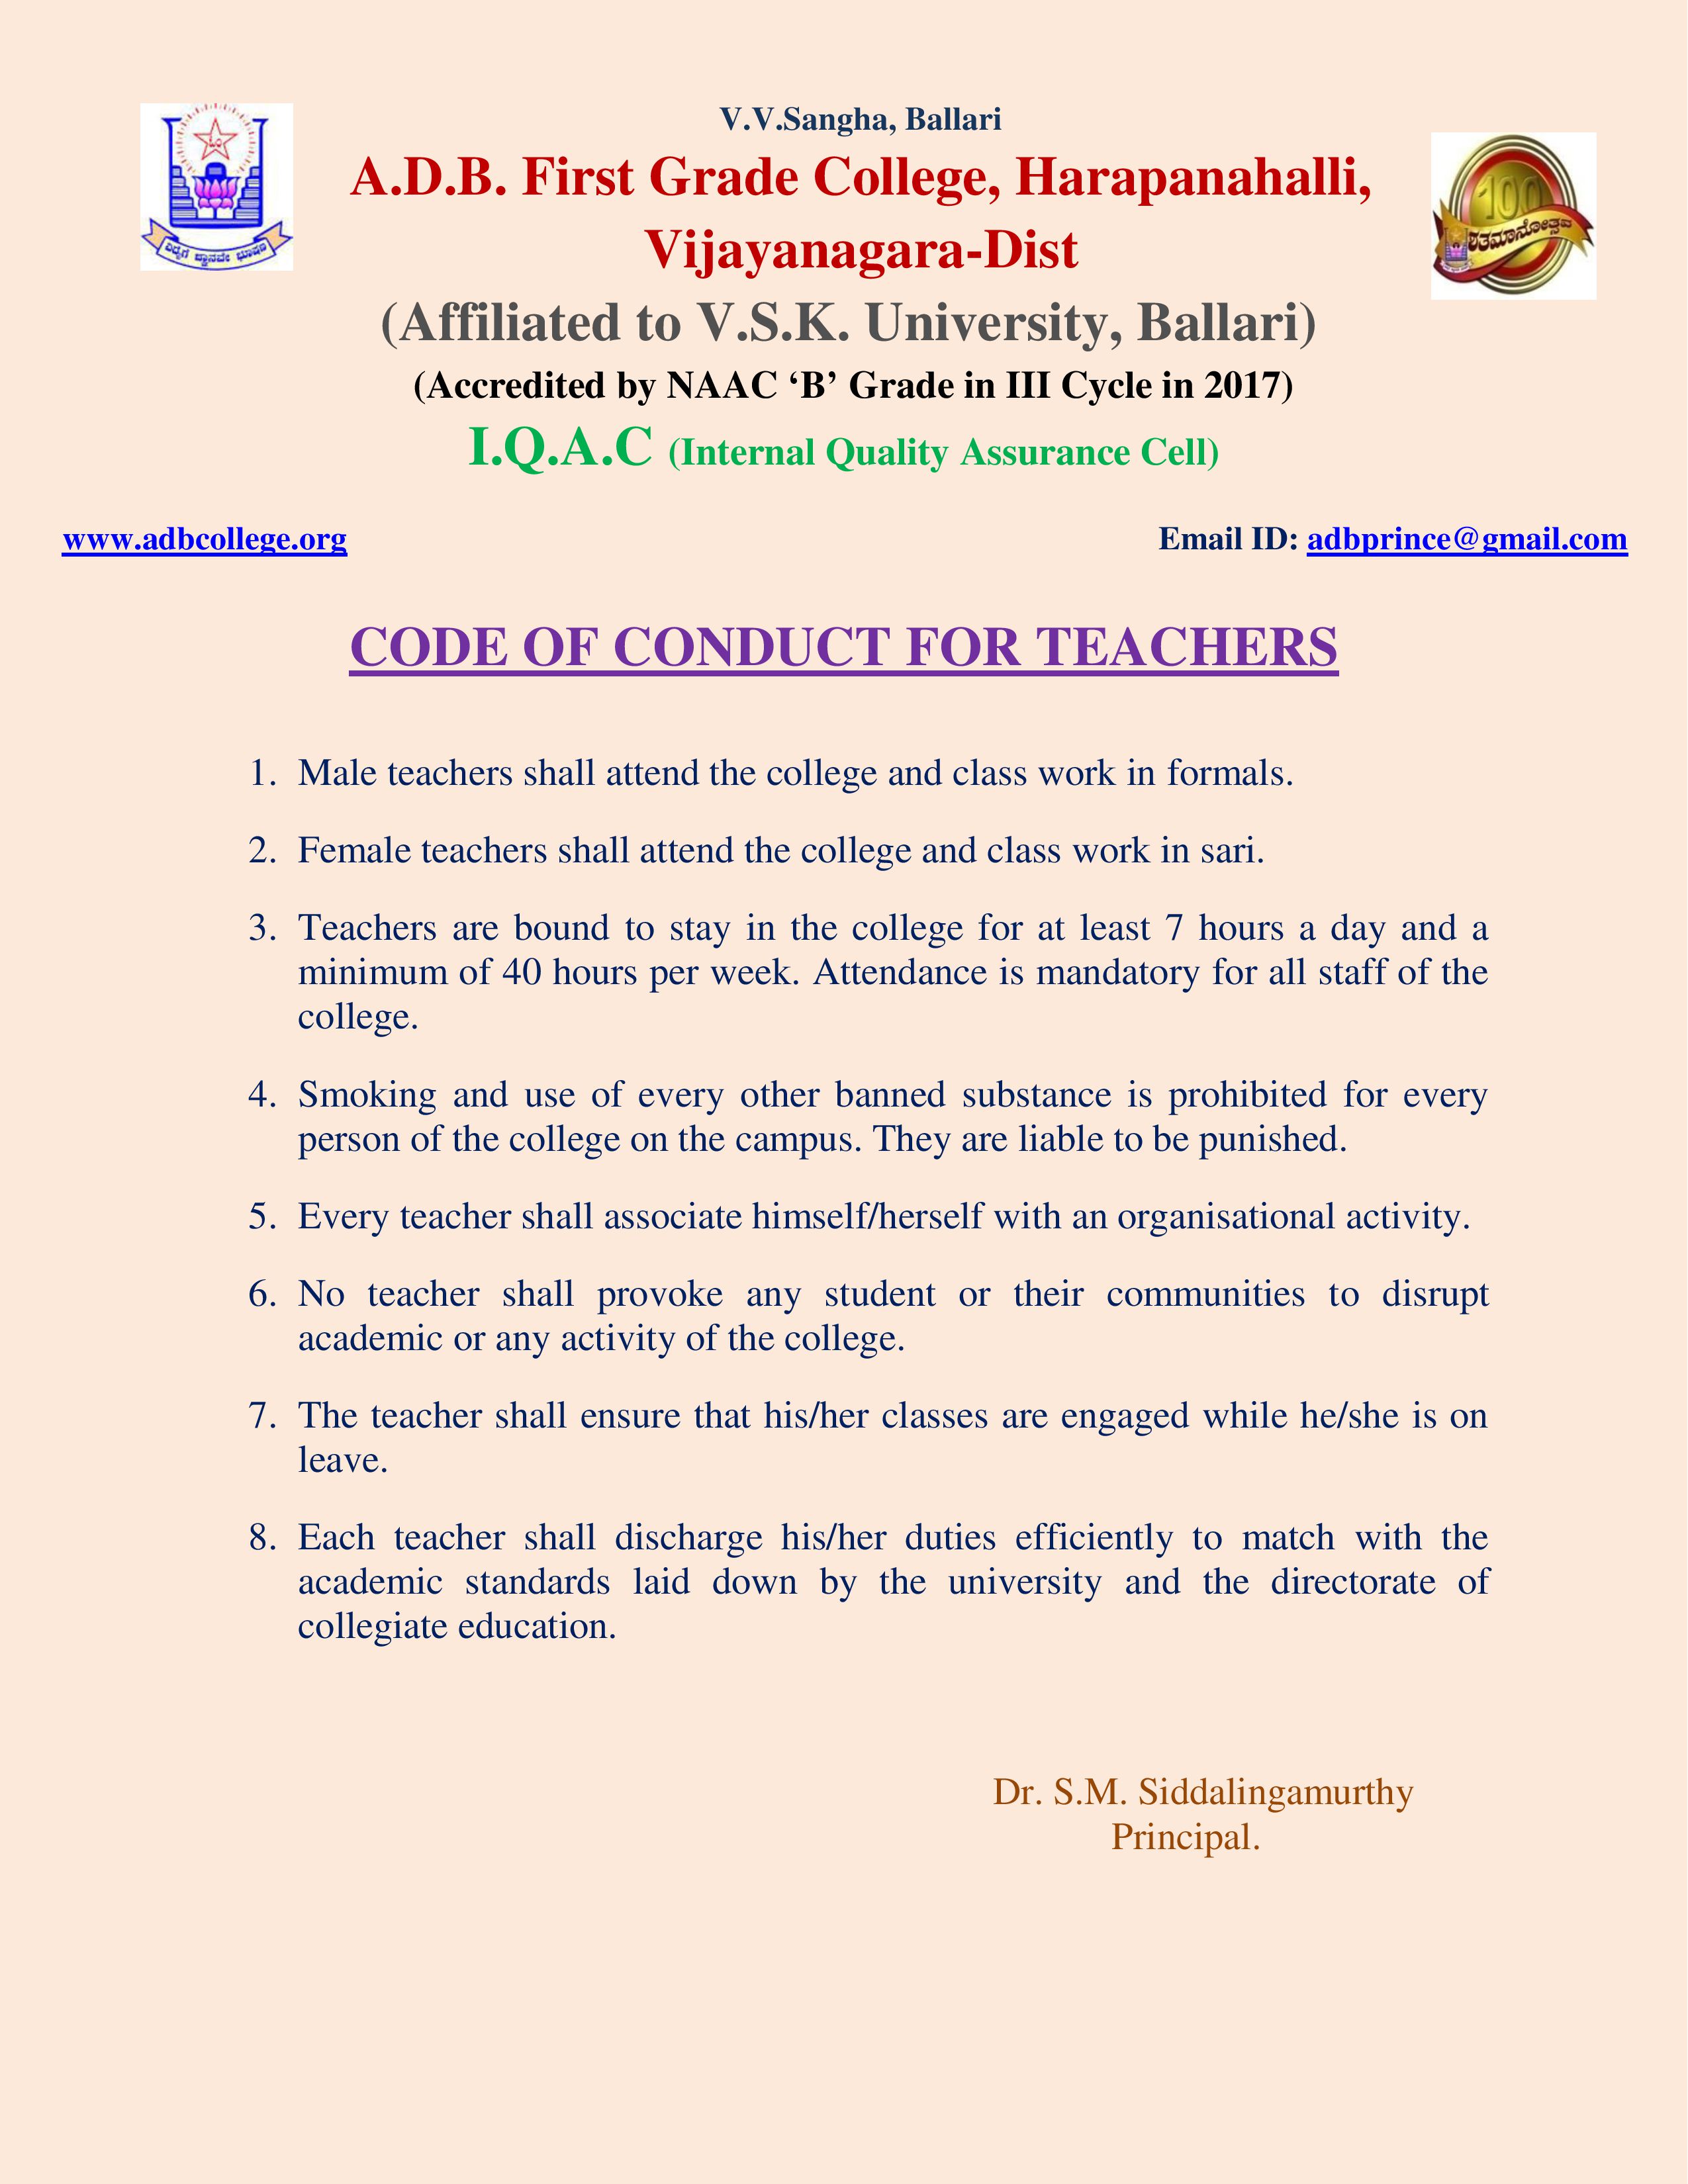 Code of conduct for Teachers